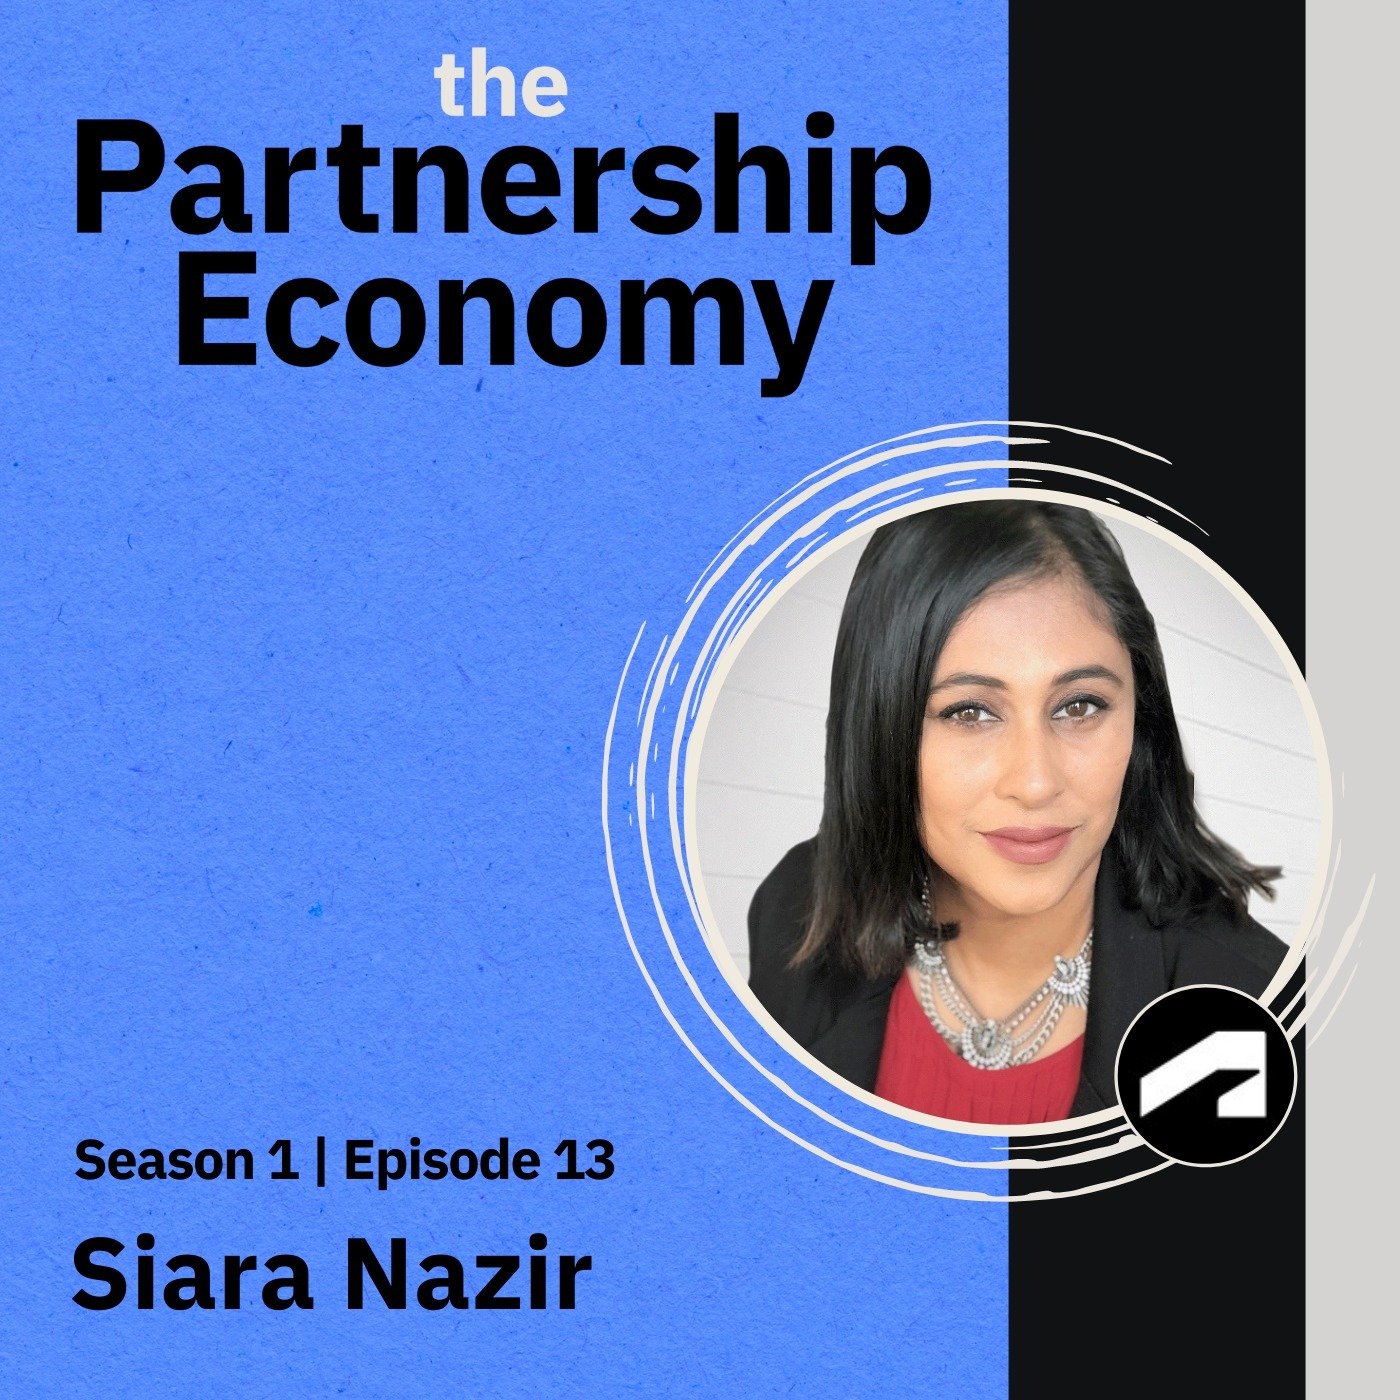 Episode cover art for Siara Nazir, Head of Digital Marketing at Autodesk, on leveraging B2B partnerships and digitally transforming a brand